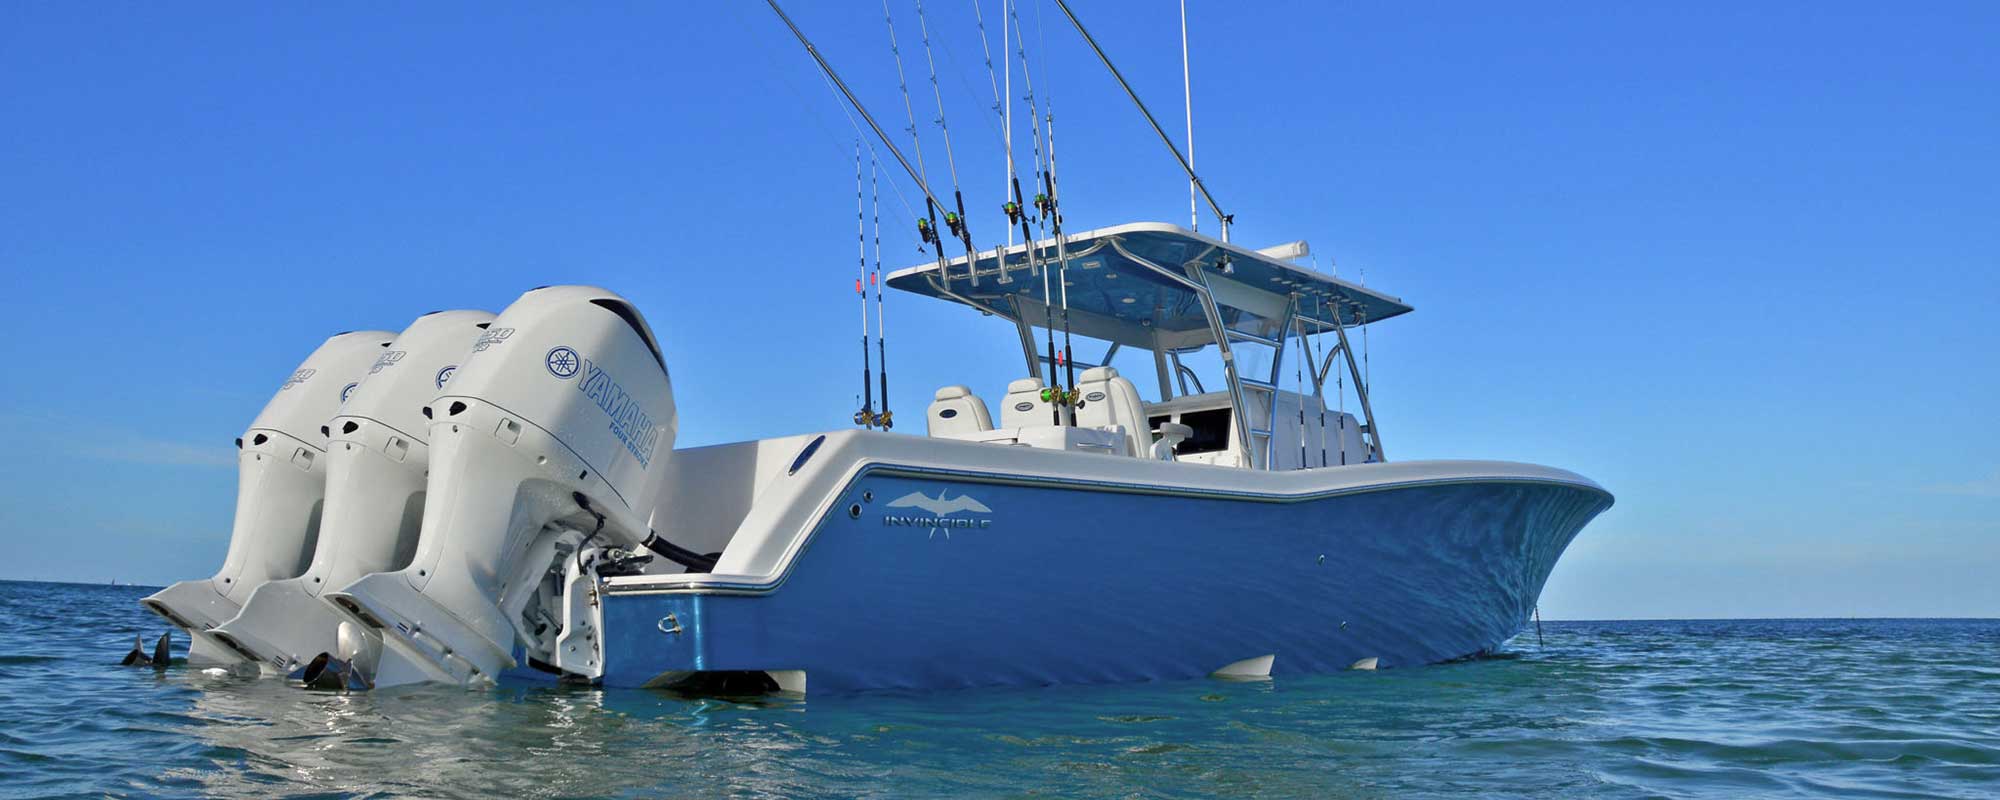 Invincible boat anchored offshore with yamaha outboards